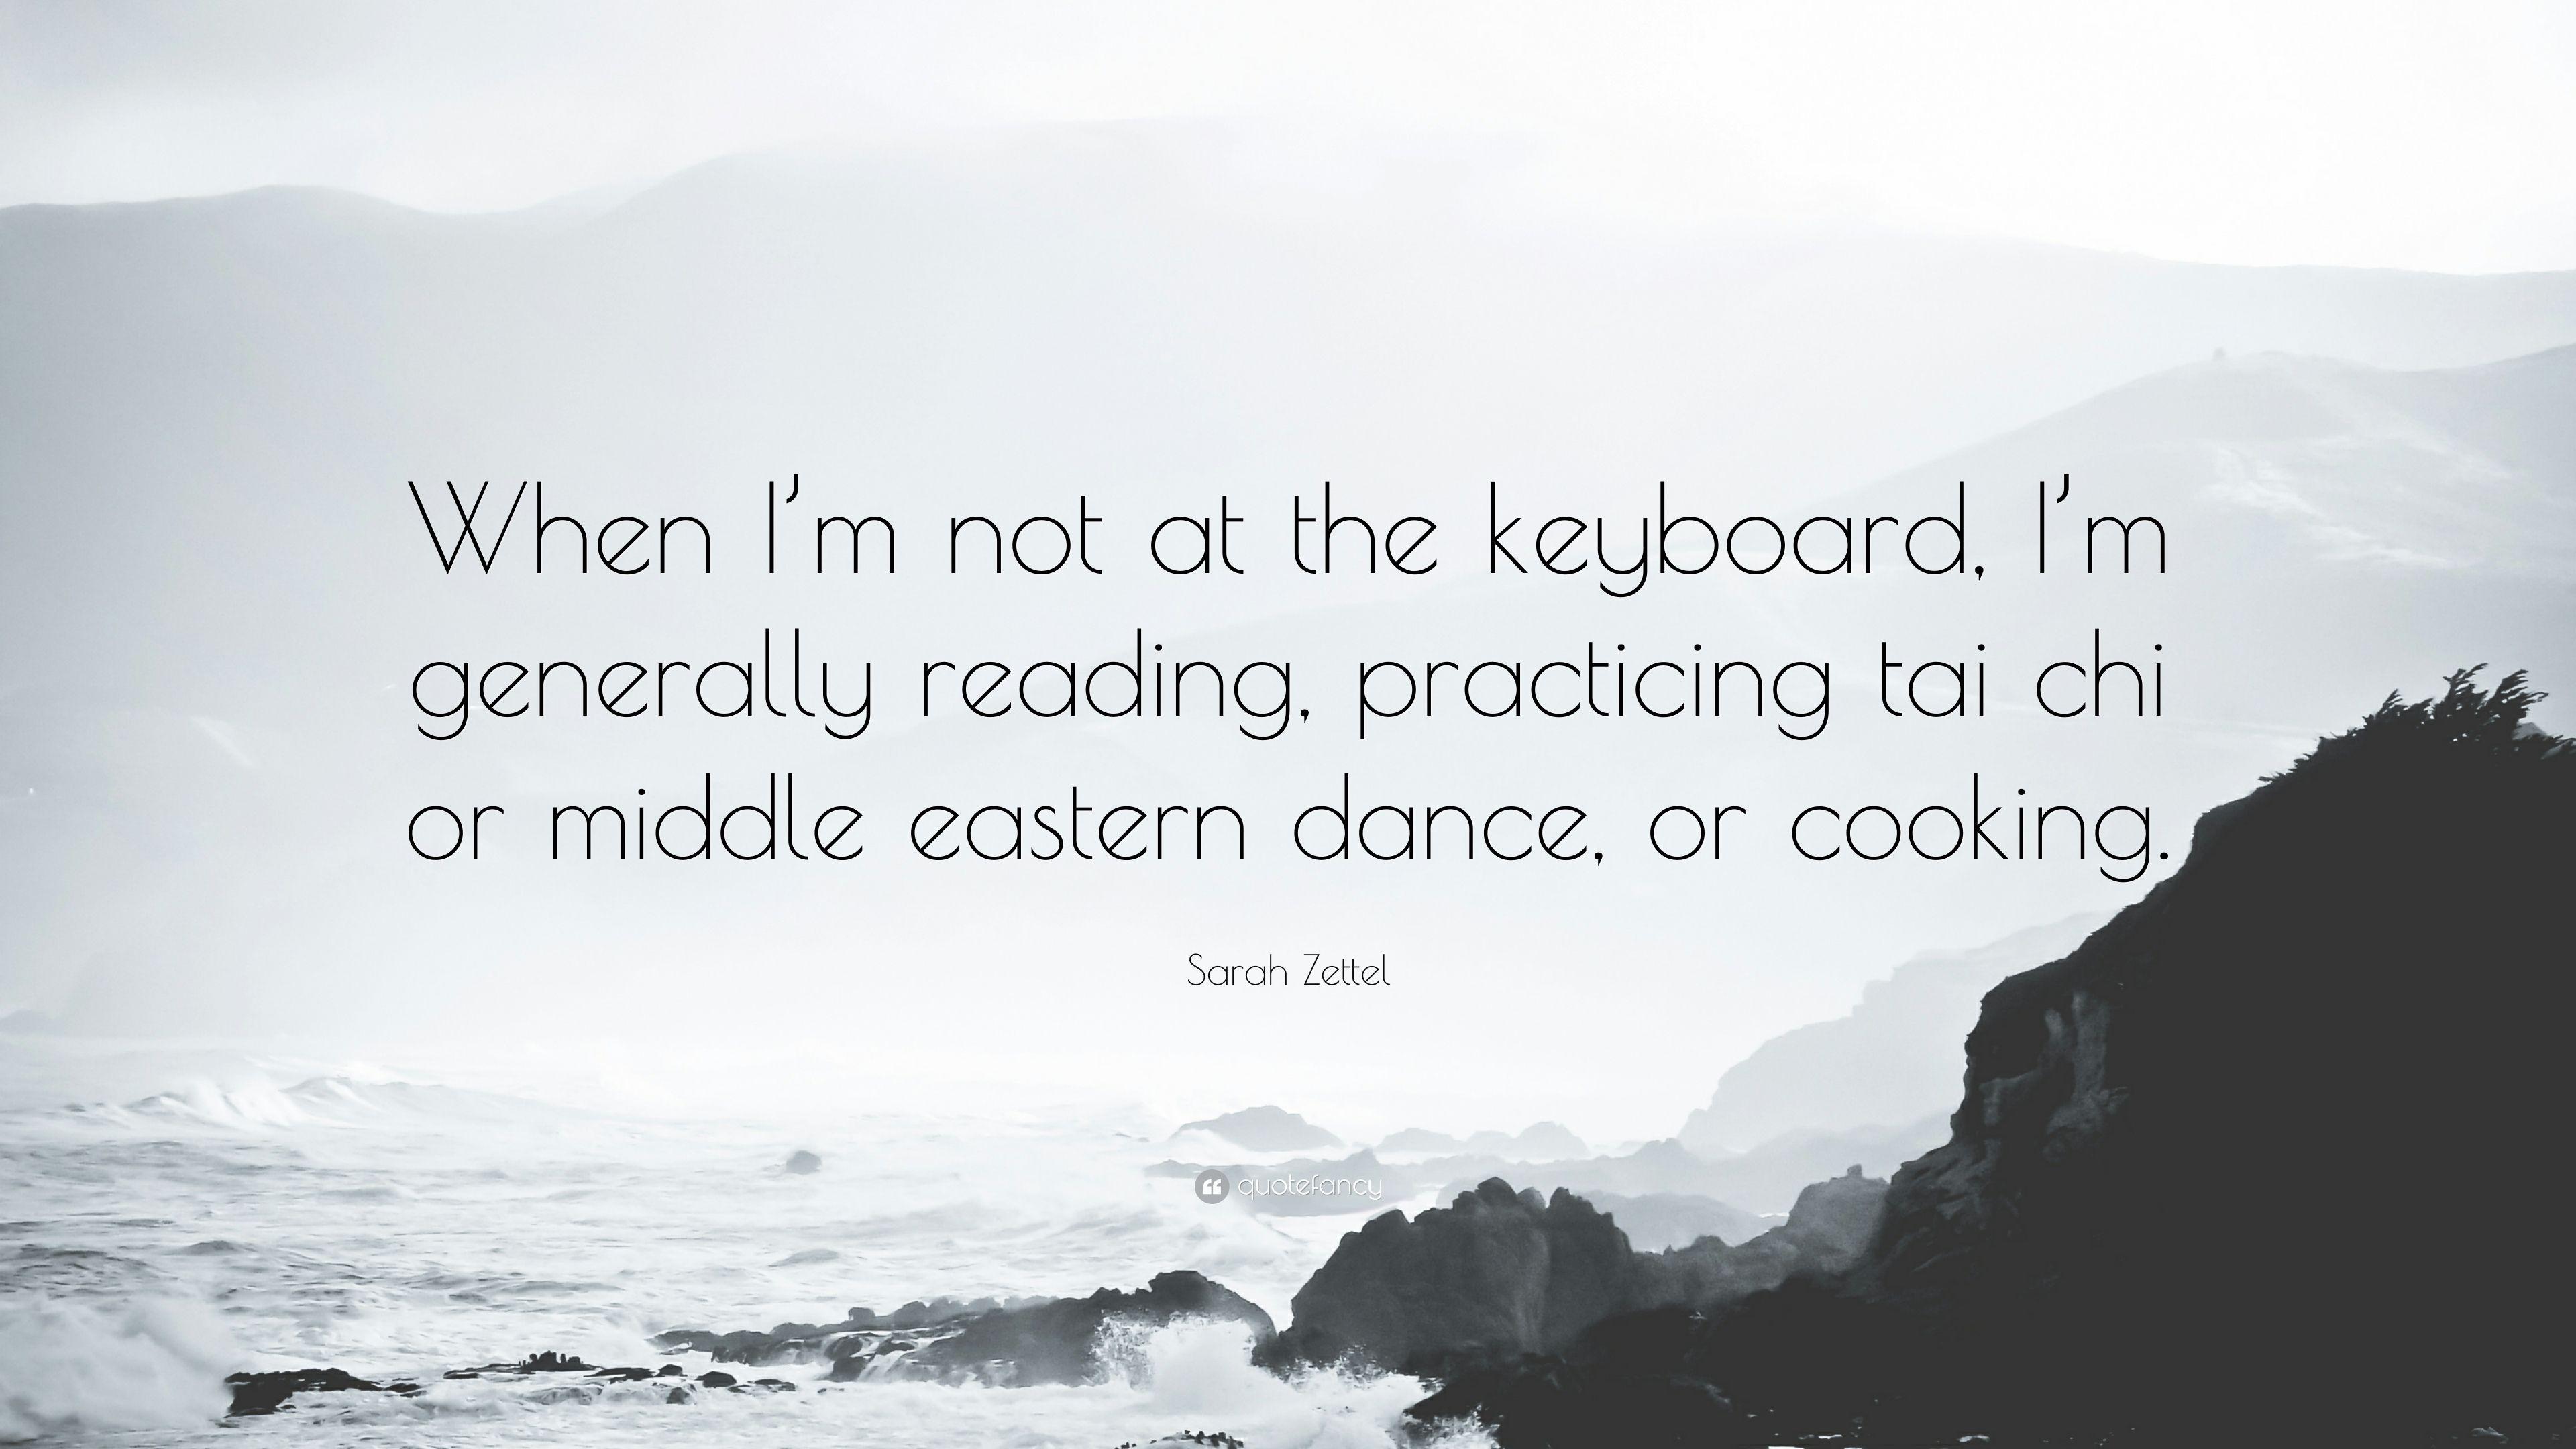 Sarah Zettel Quote: “When I'm not at the keyboard, I'm generally